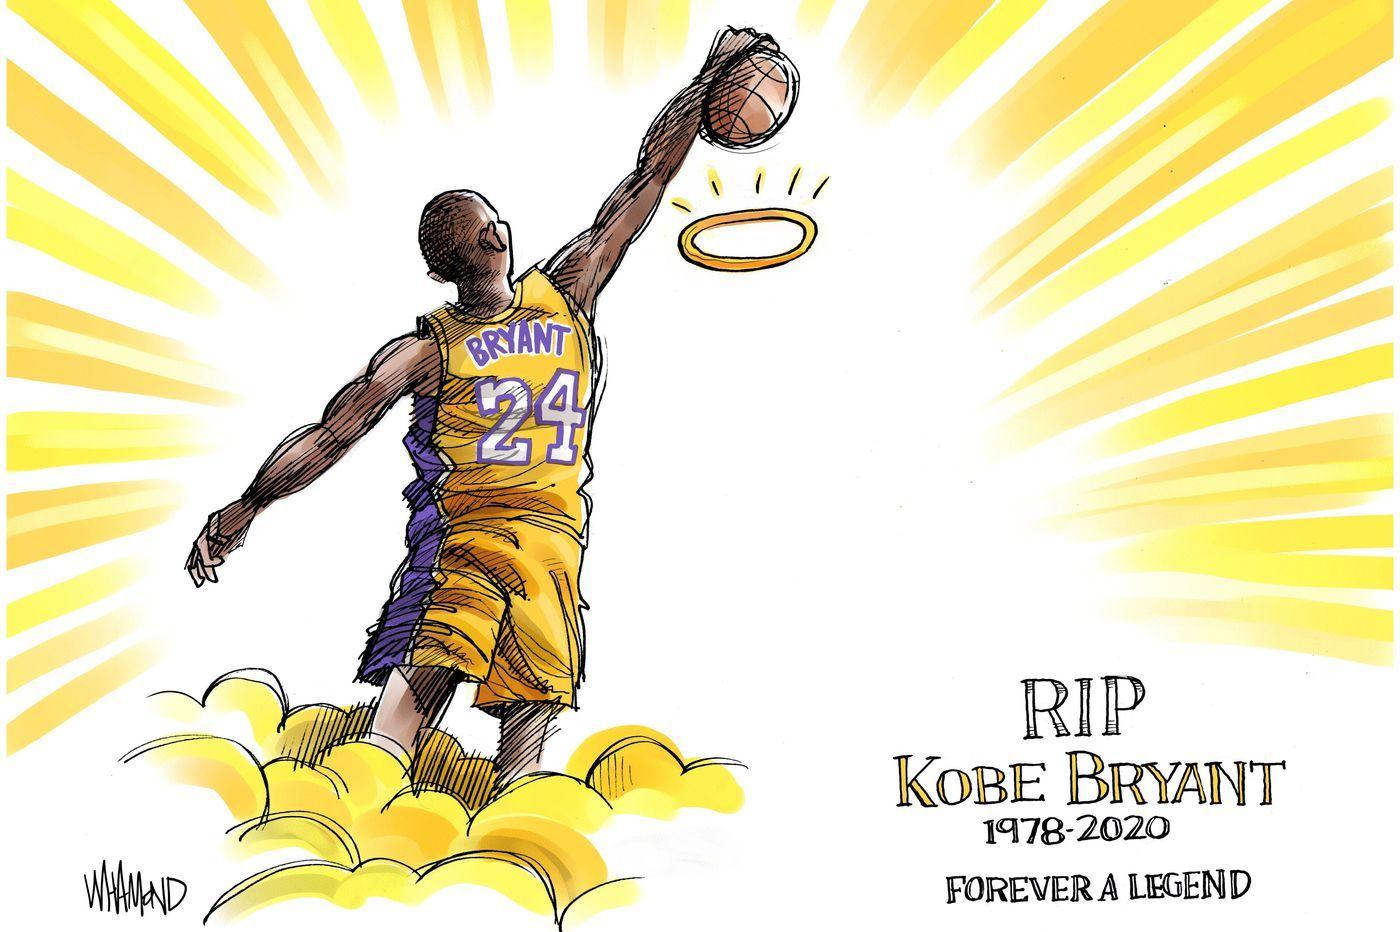 Cartoons: Kobe Bryant's death, memorialized by artists around the